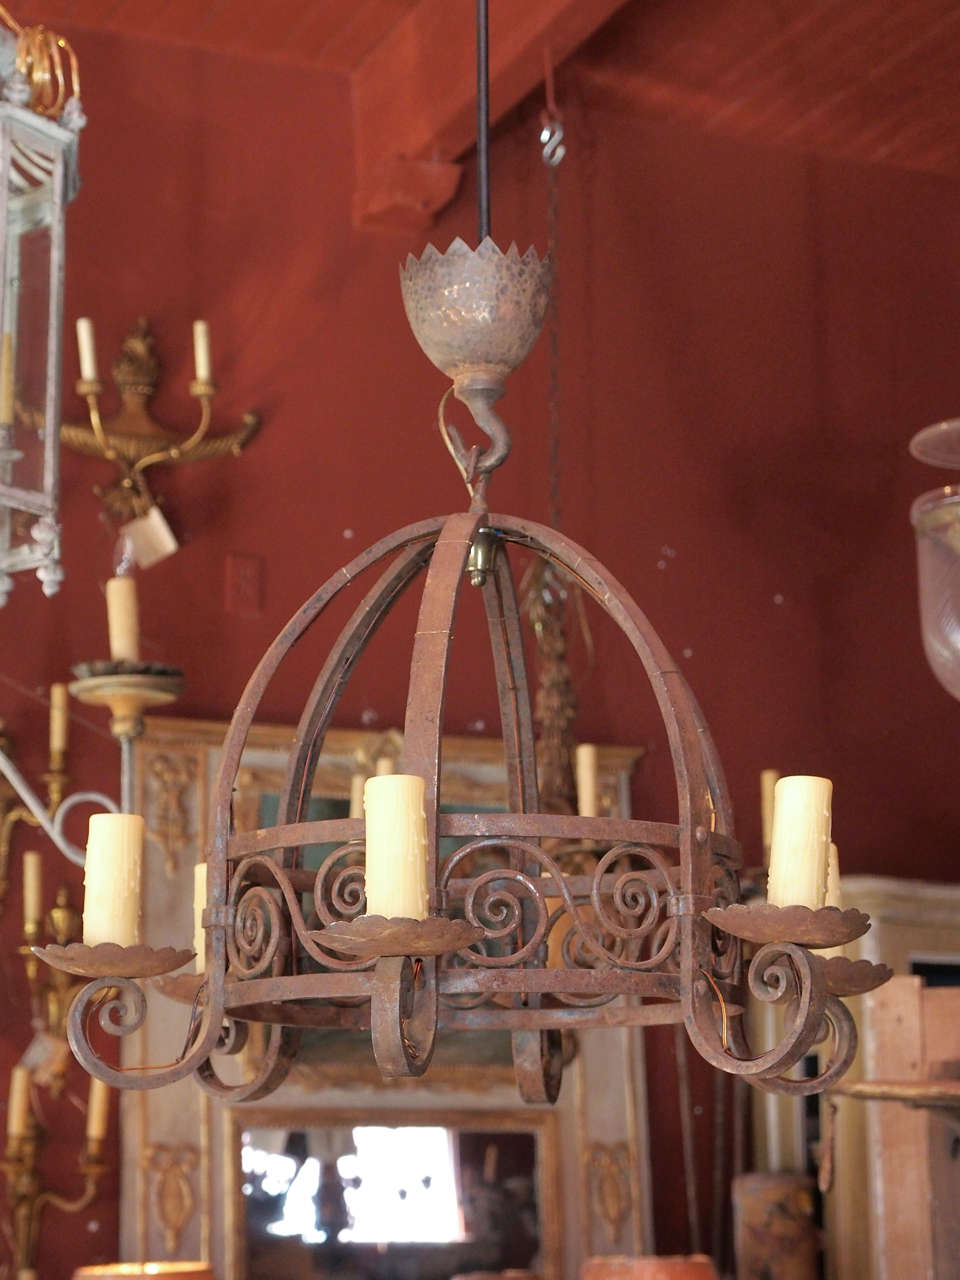 A 6 light dome wrought iron chandelier with matching ceiling cap. This
chandelier is extremely heavy.